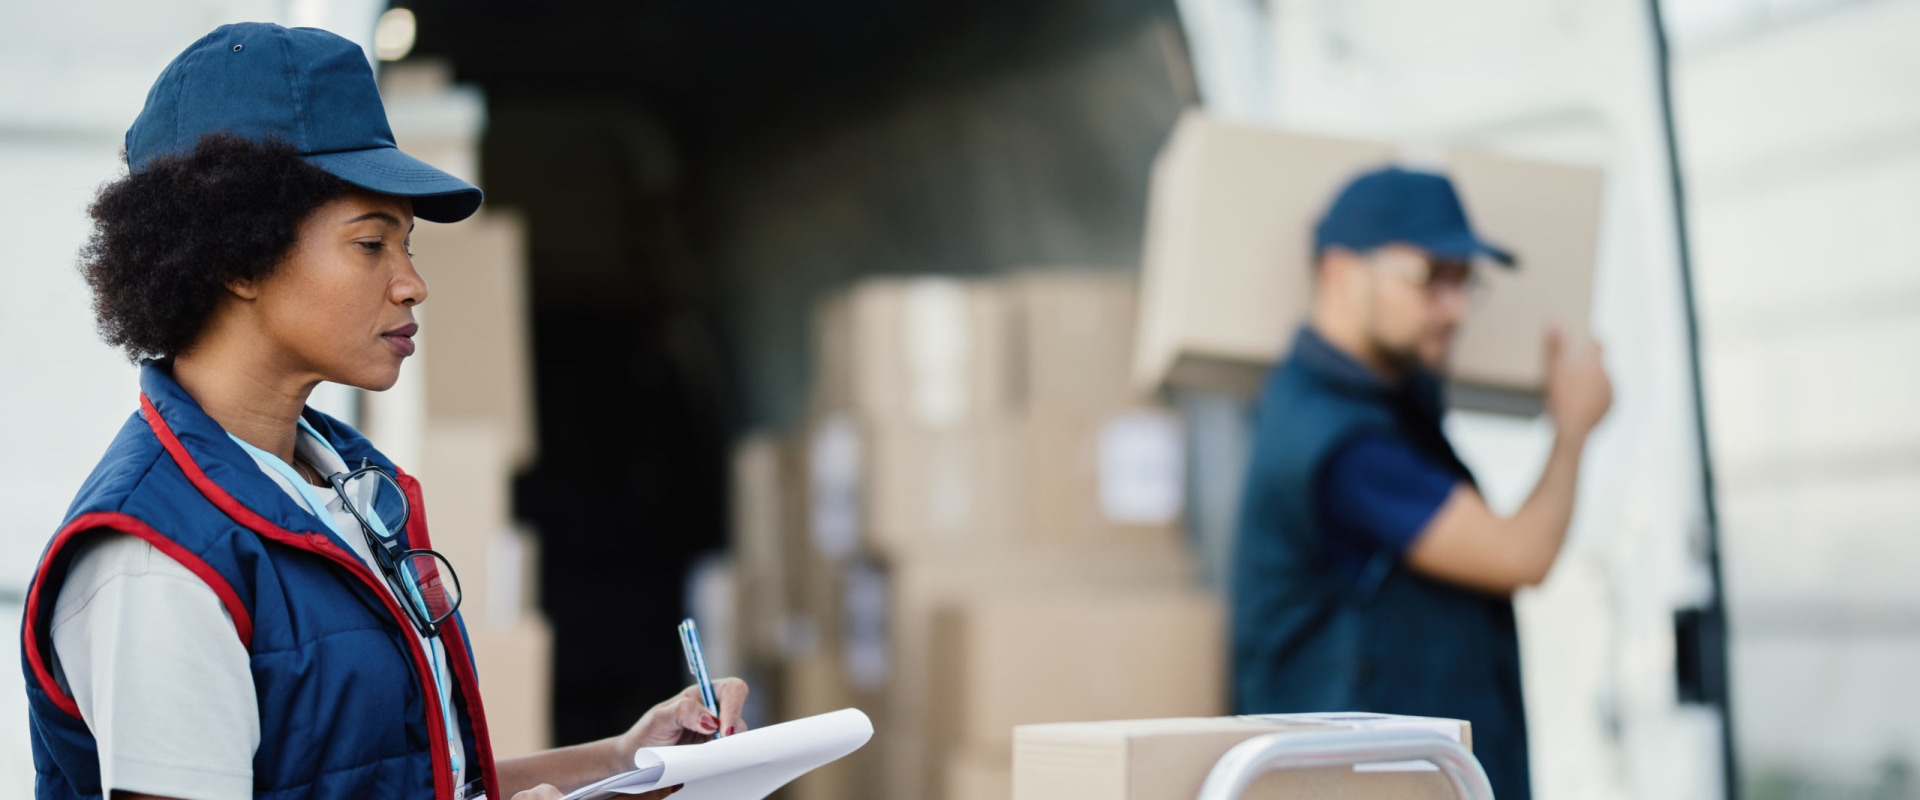 What Type of Business is a Moving Company?